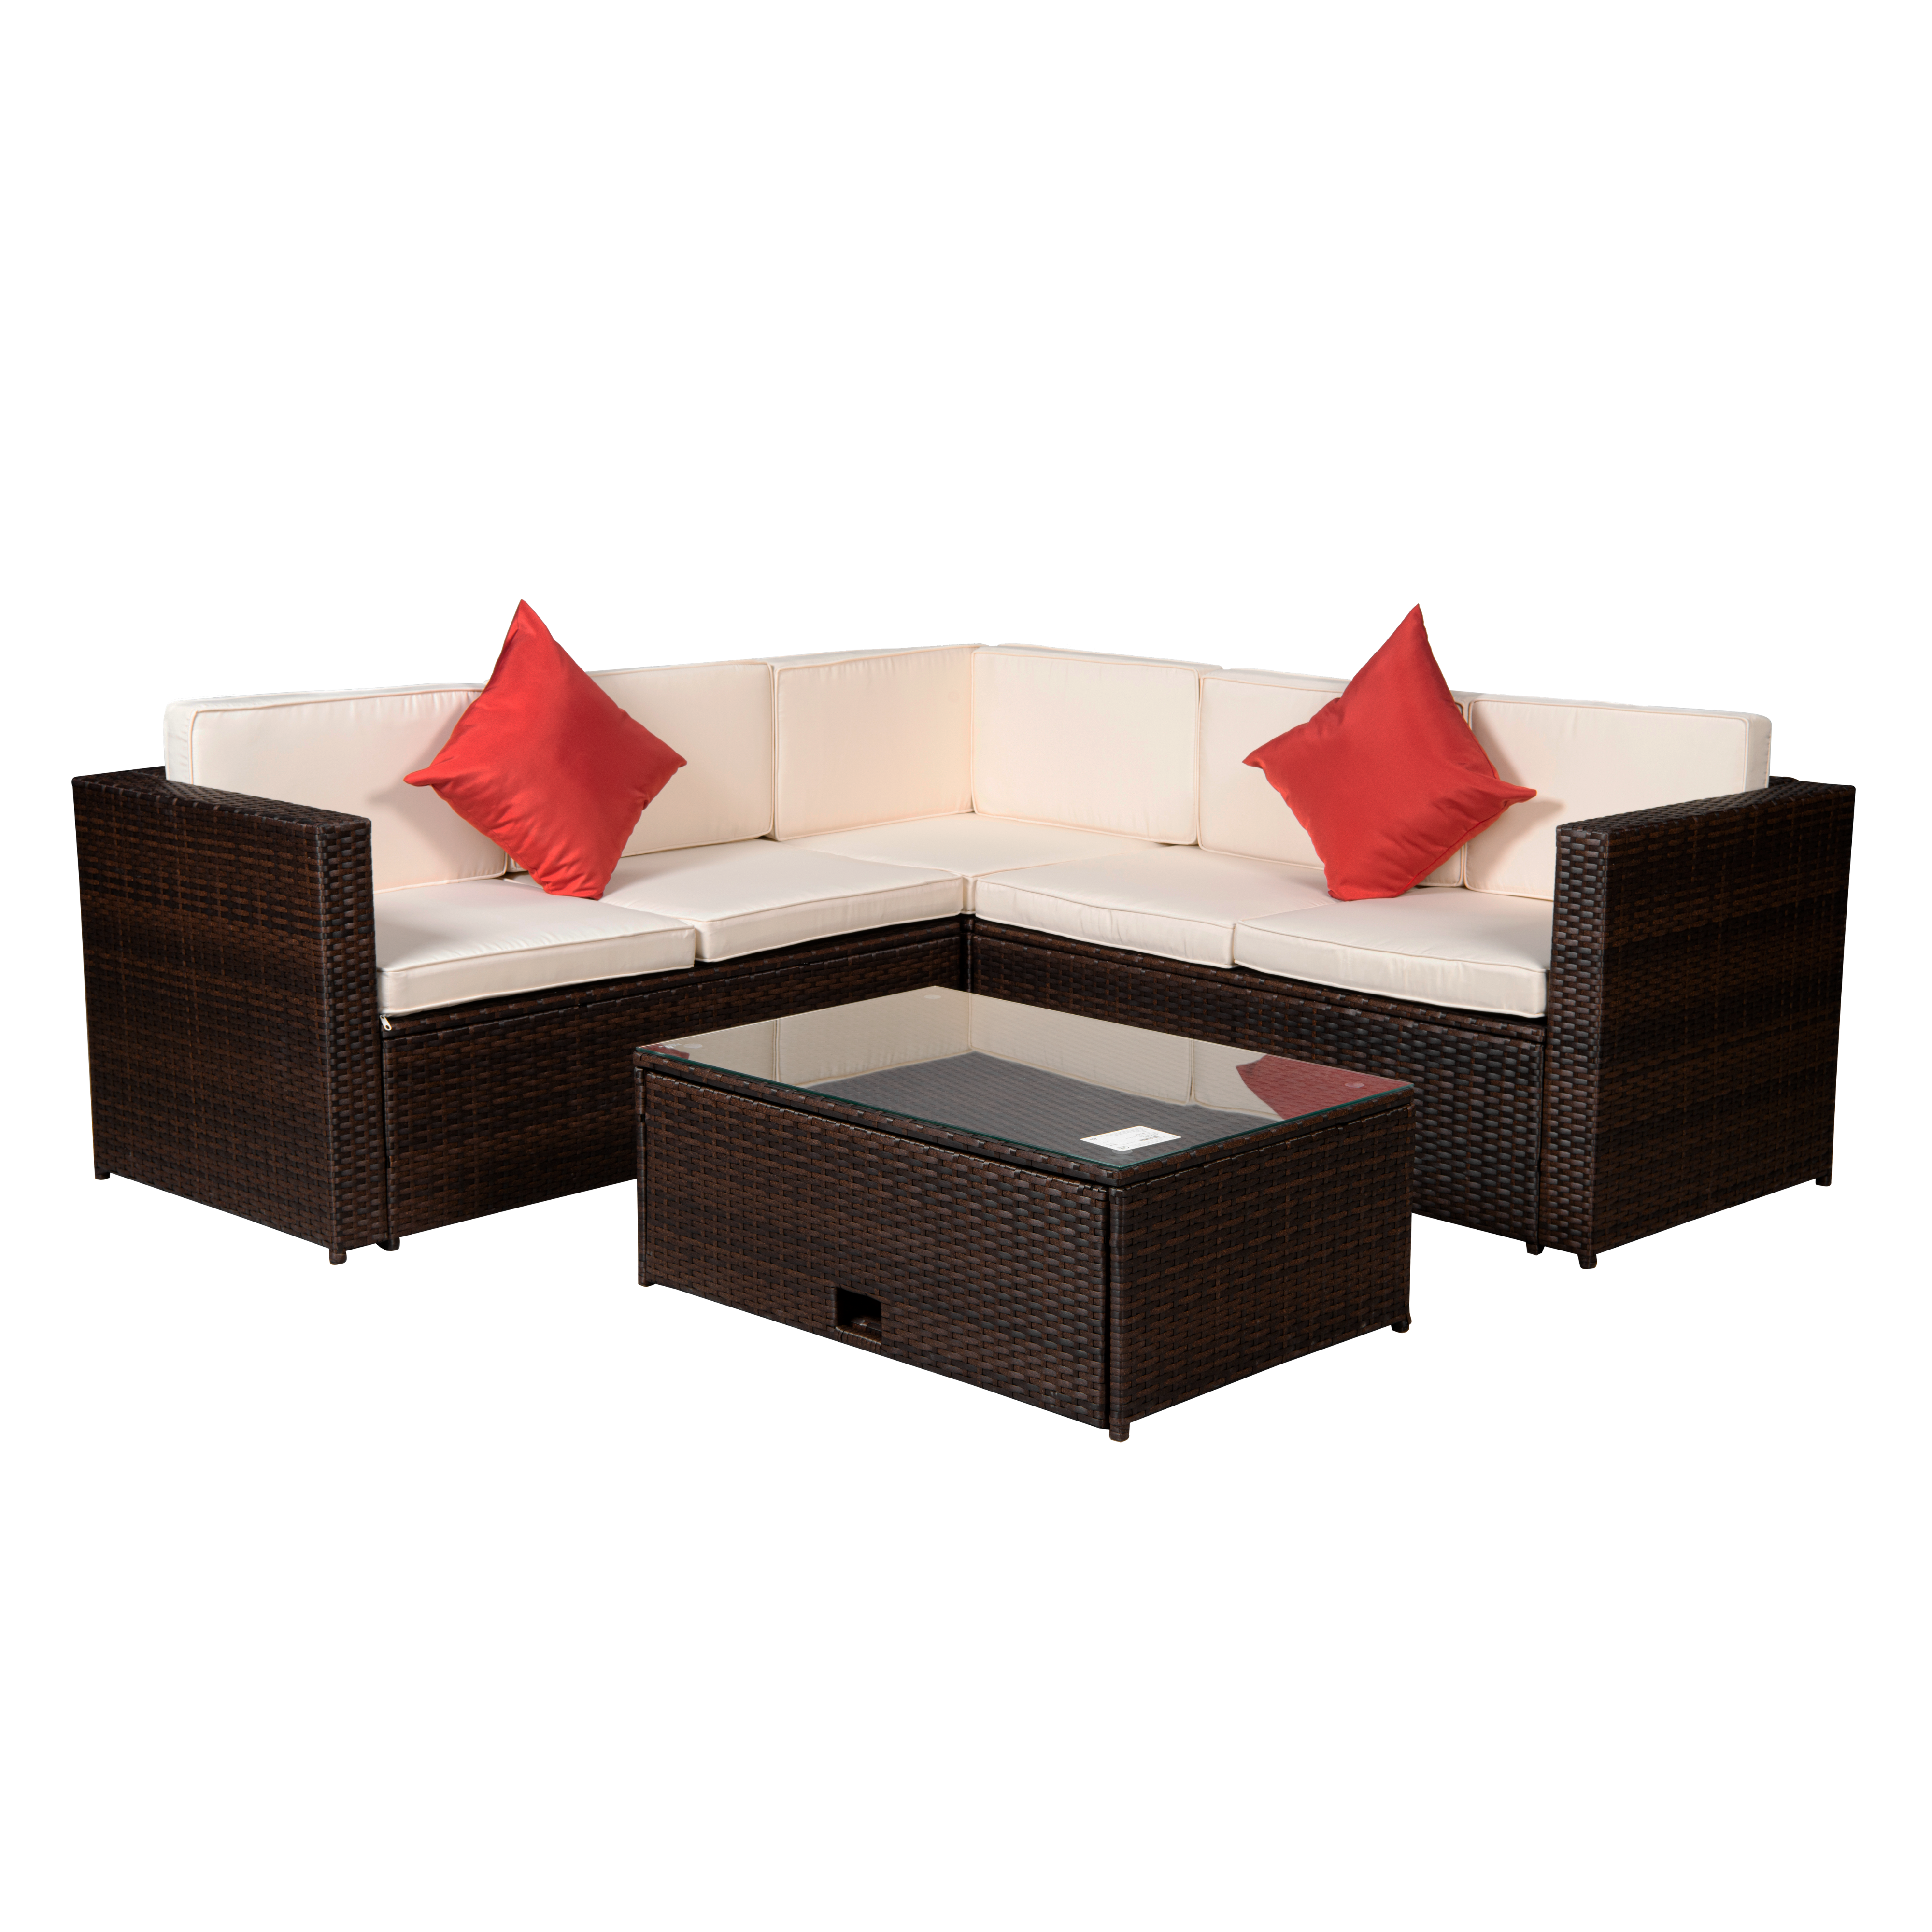 BEEFURNI Outdoor Garden Patio Furniture 4-Piece Brown PE Rattan Wicker Sectional Beige Cushioned Sofa Sets with 2 Red Pillows and Coffee Table-Boyel Living